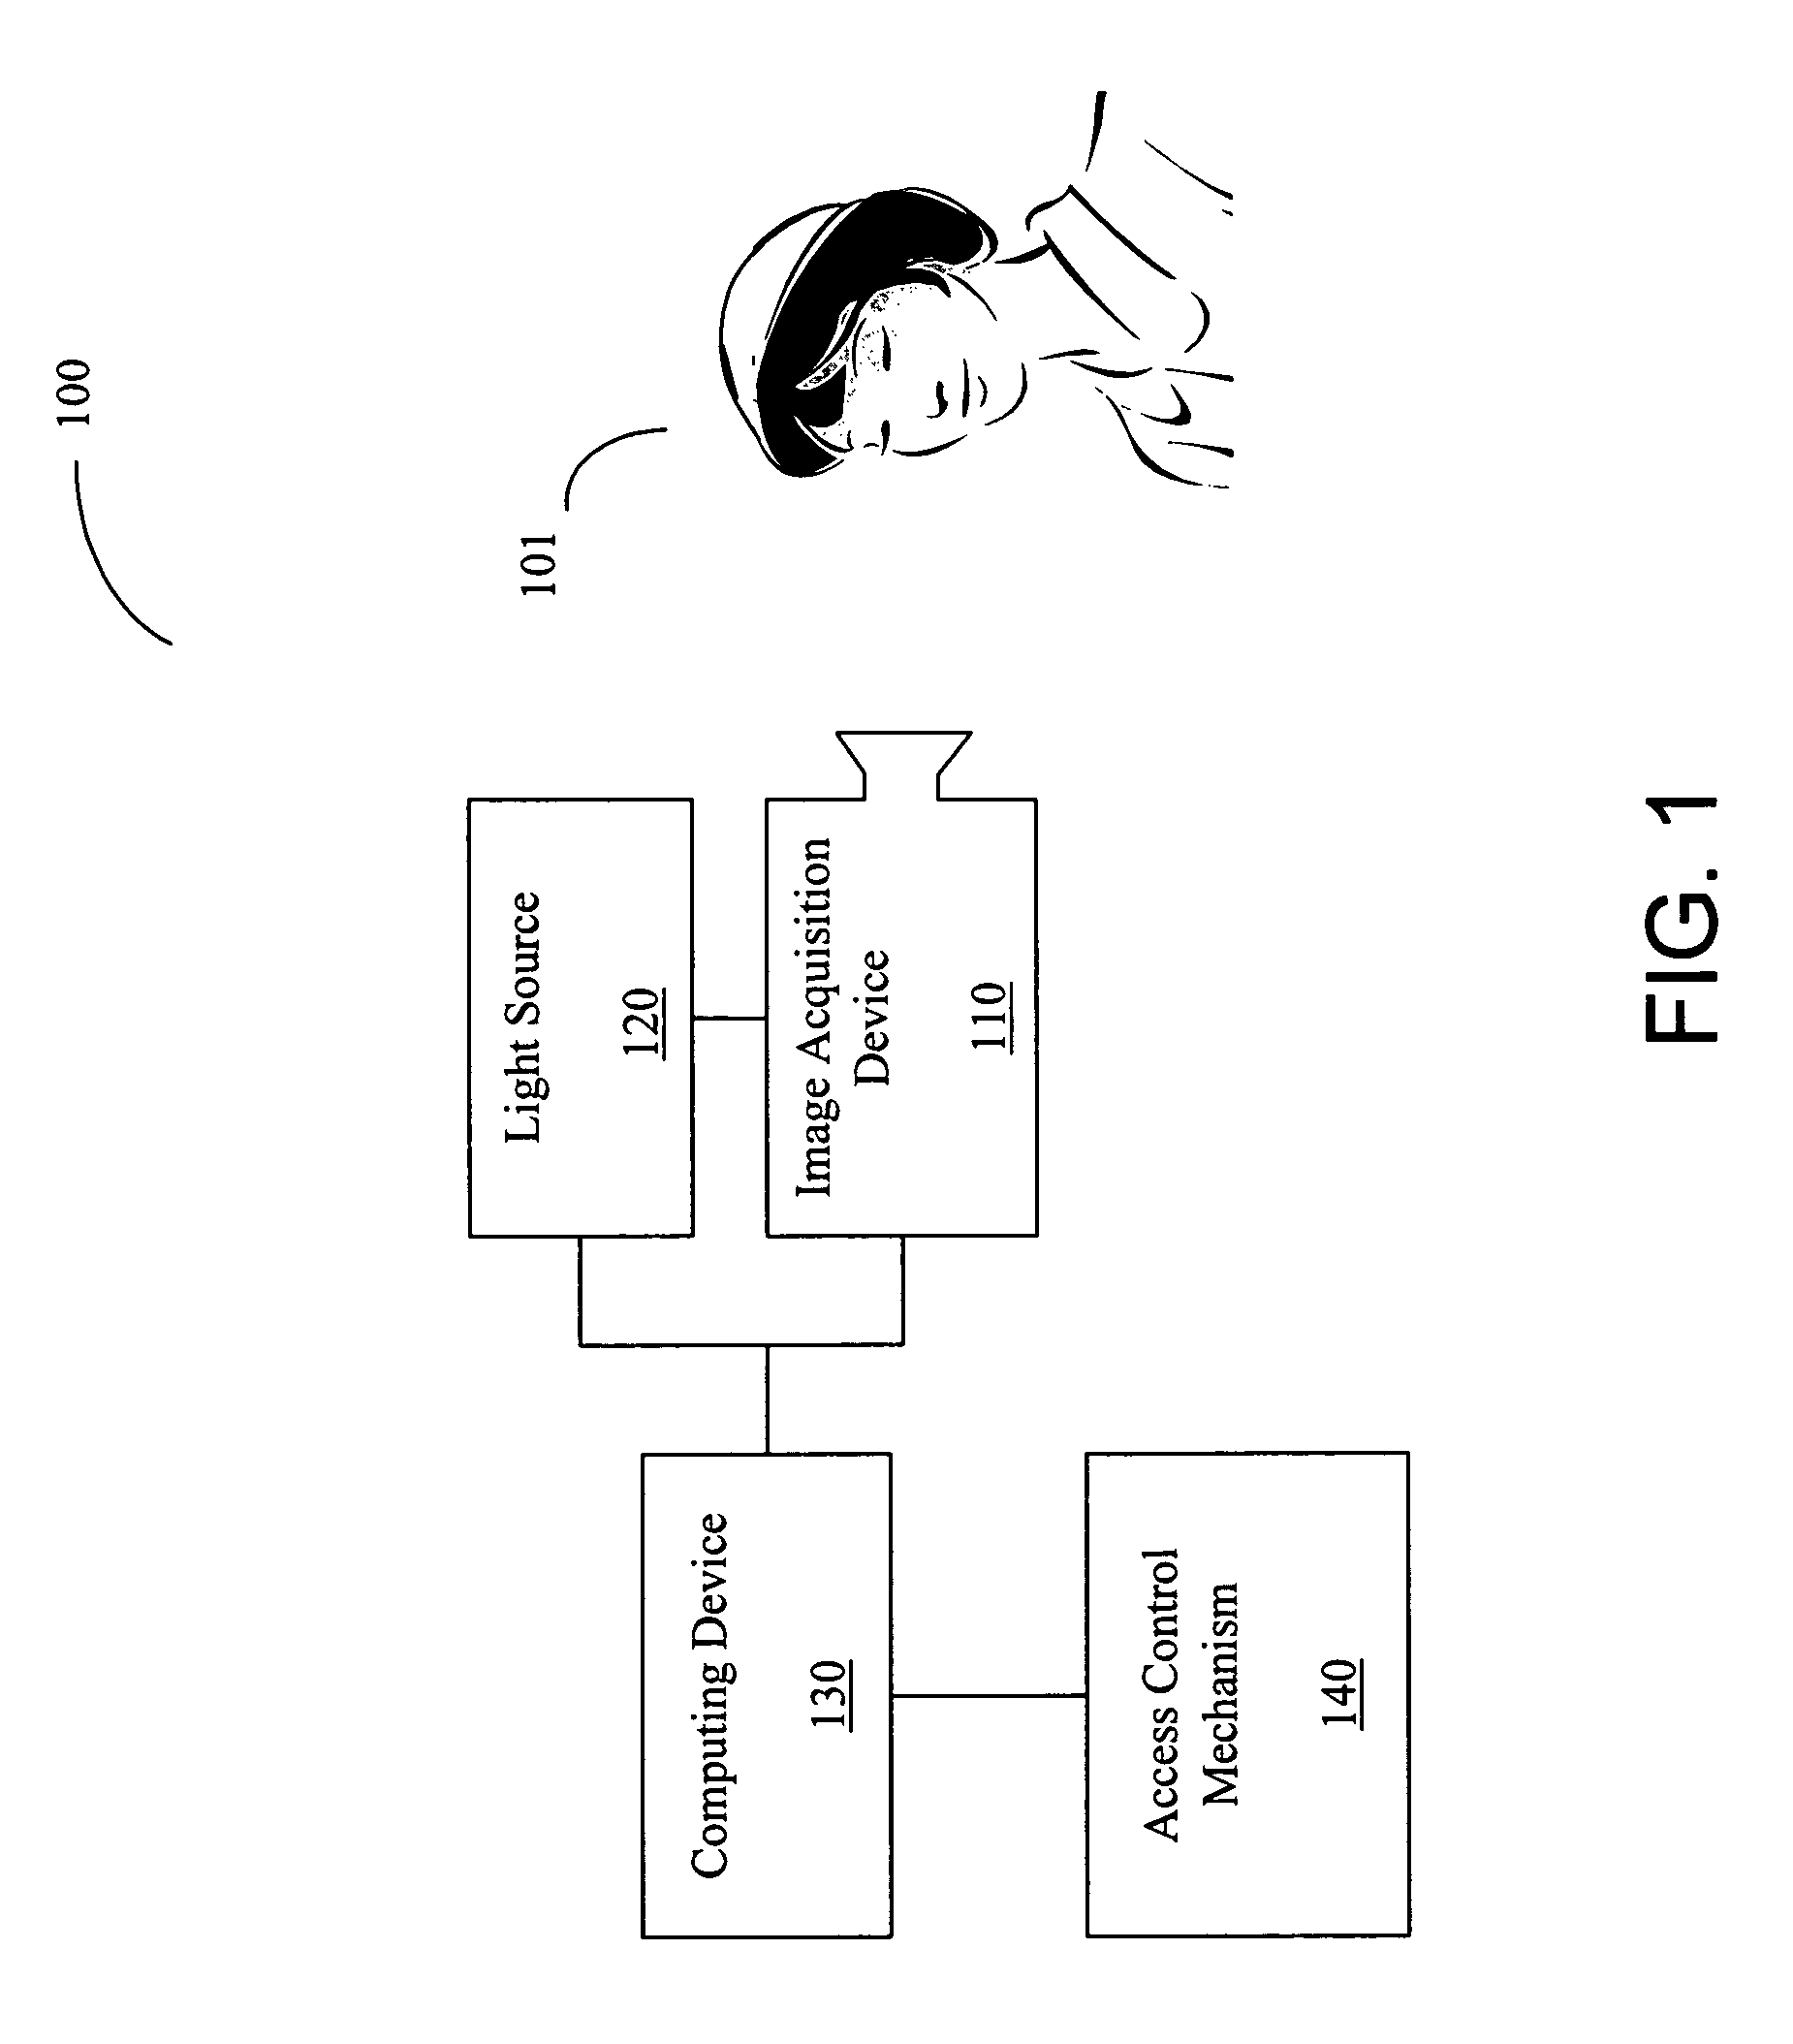 Systems and methods for automatic skin-based identification of people using digital images